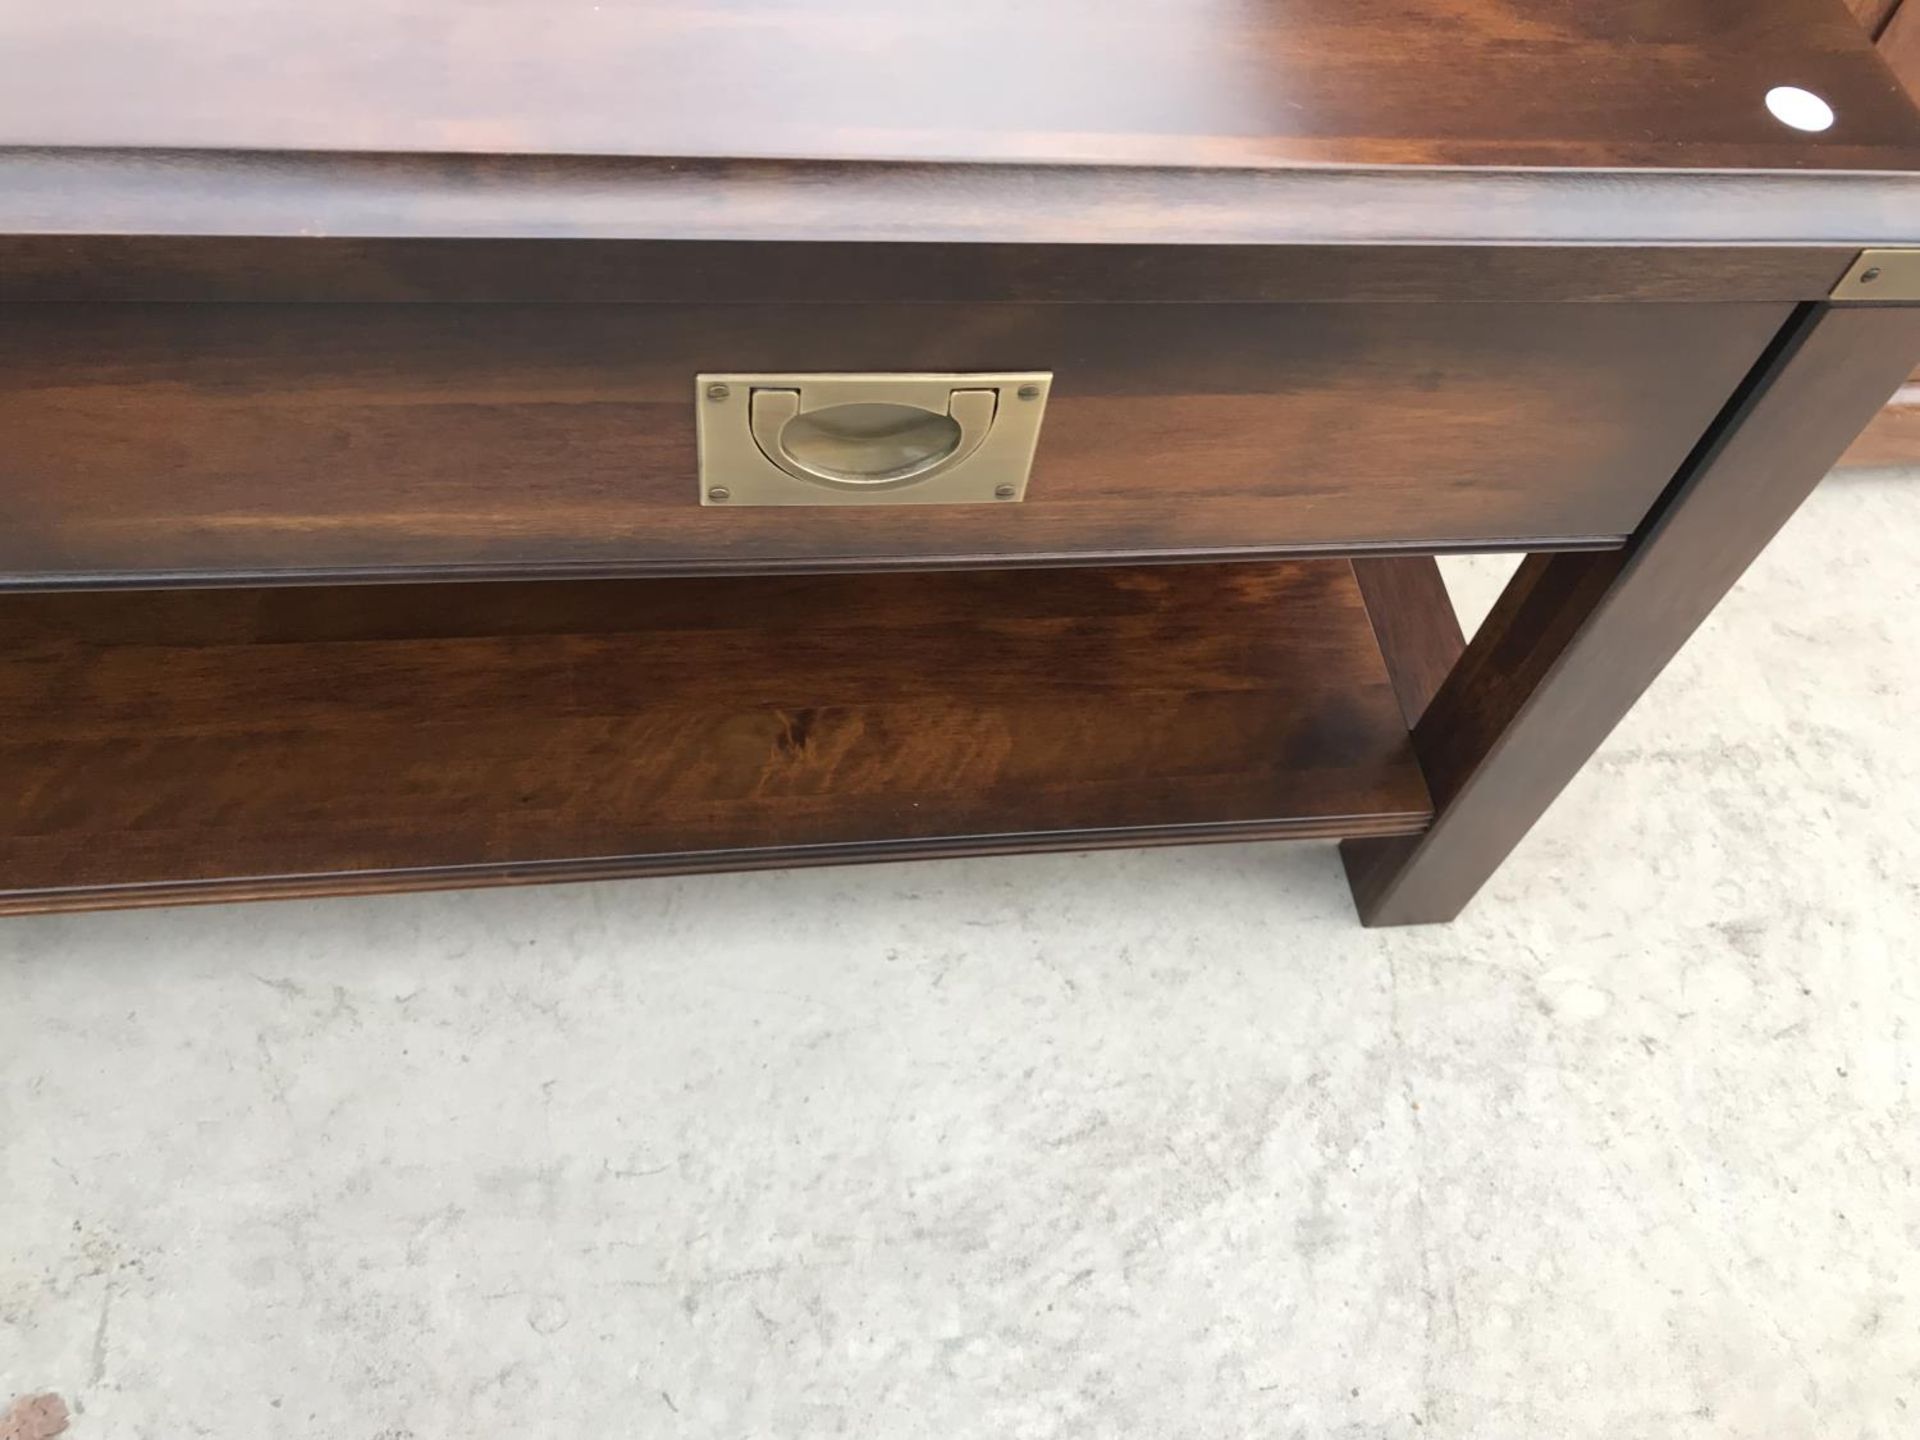 A MAHOGANY COFFEE TABLE WITH TWO DRAWERS WITH RECESSED BRASS HANDLES - Image 3 of 3